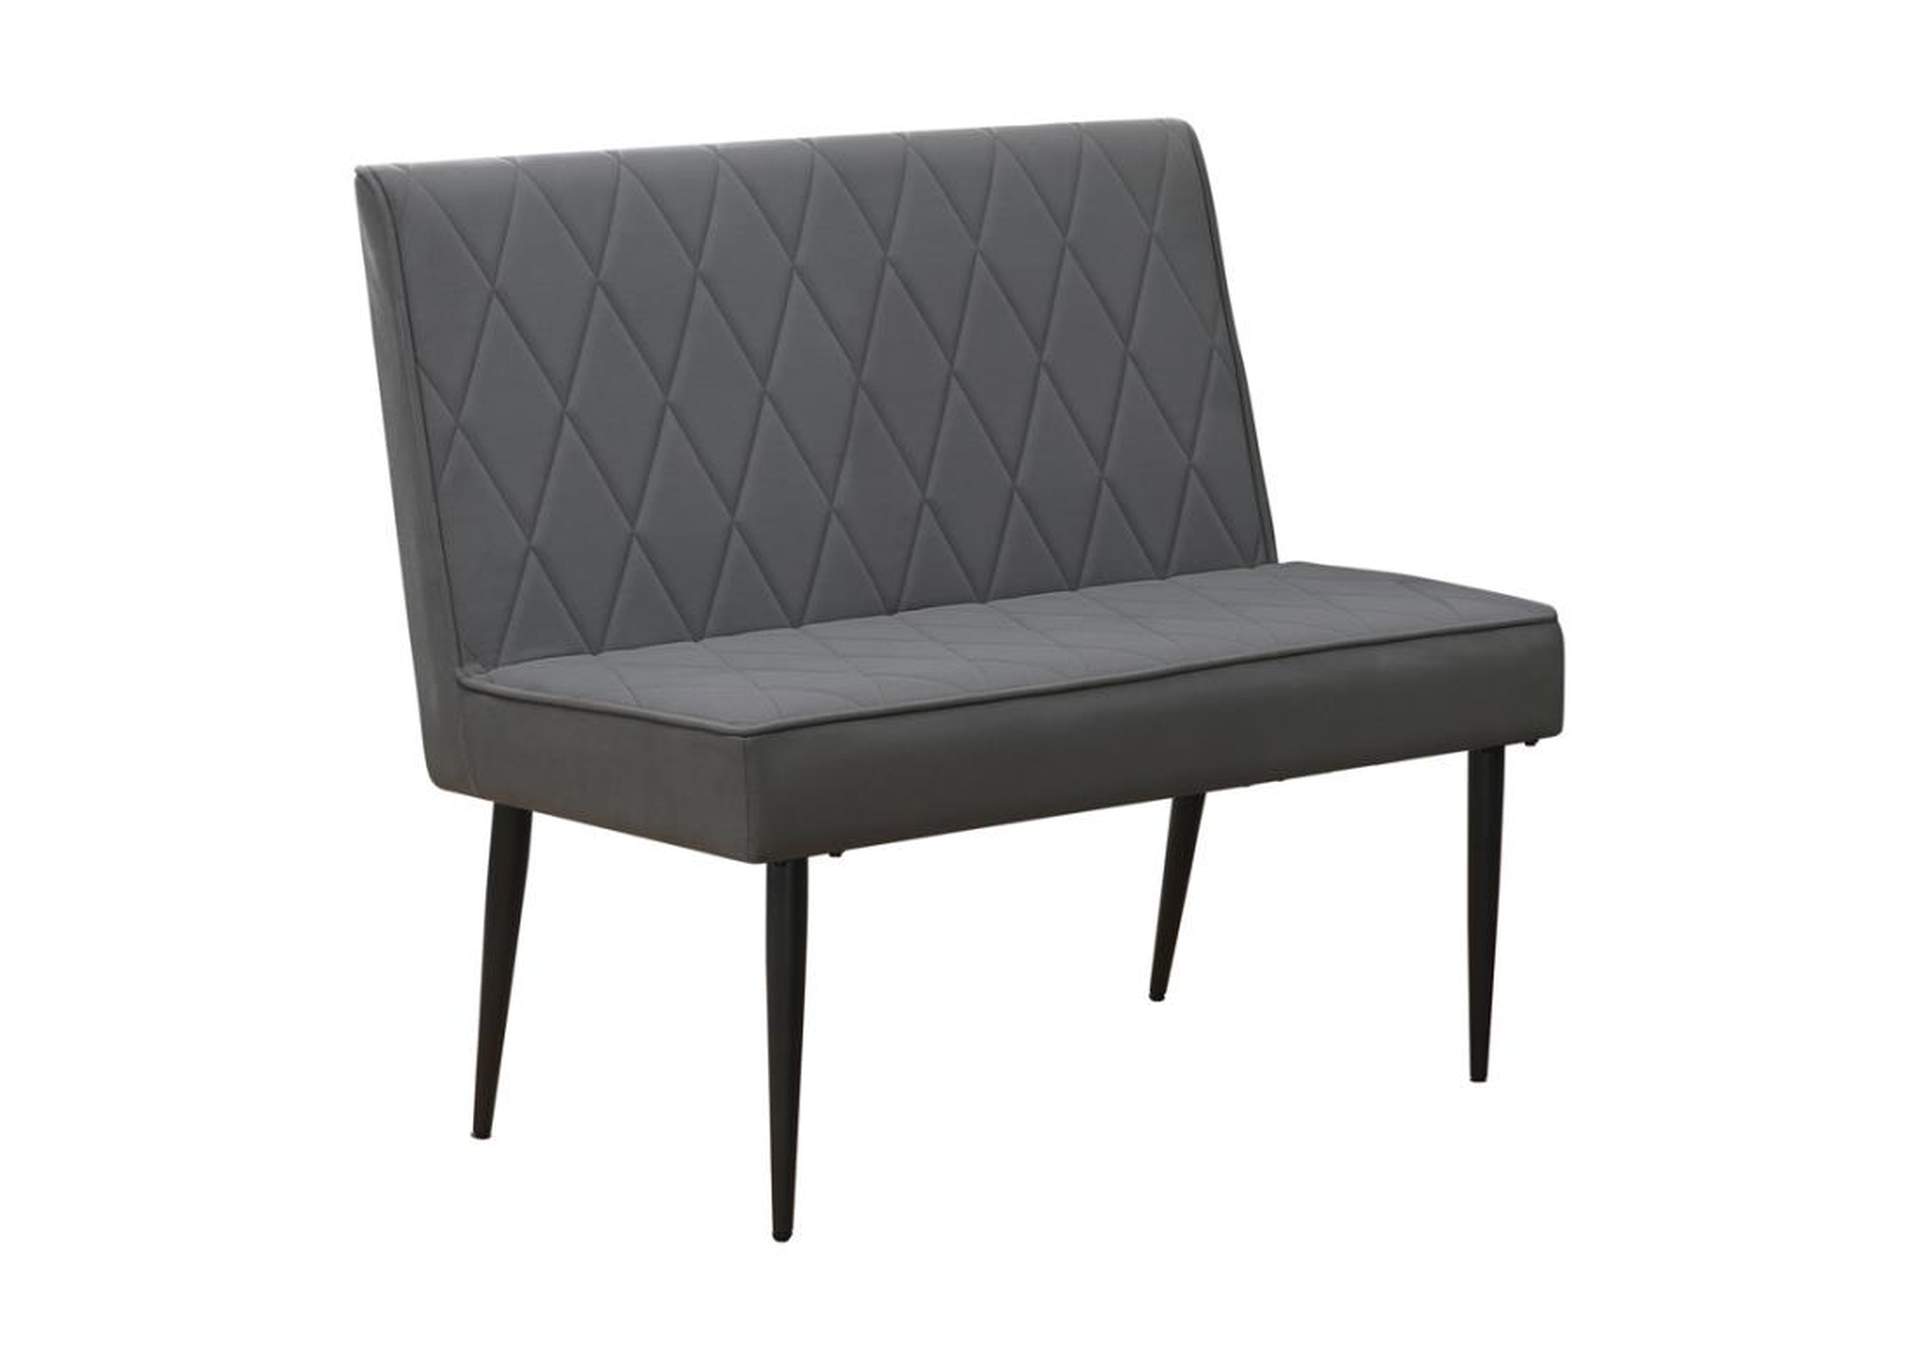 Moxee Upholstered Tufted Short Bench Grey,Coaster Furniture